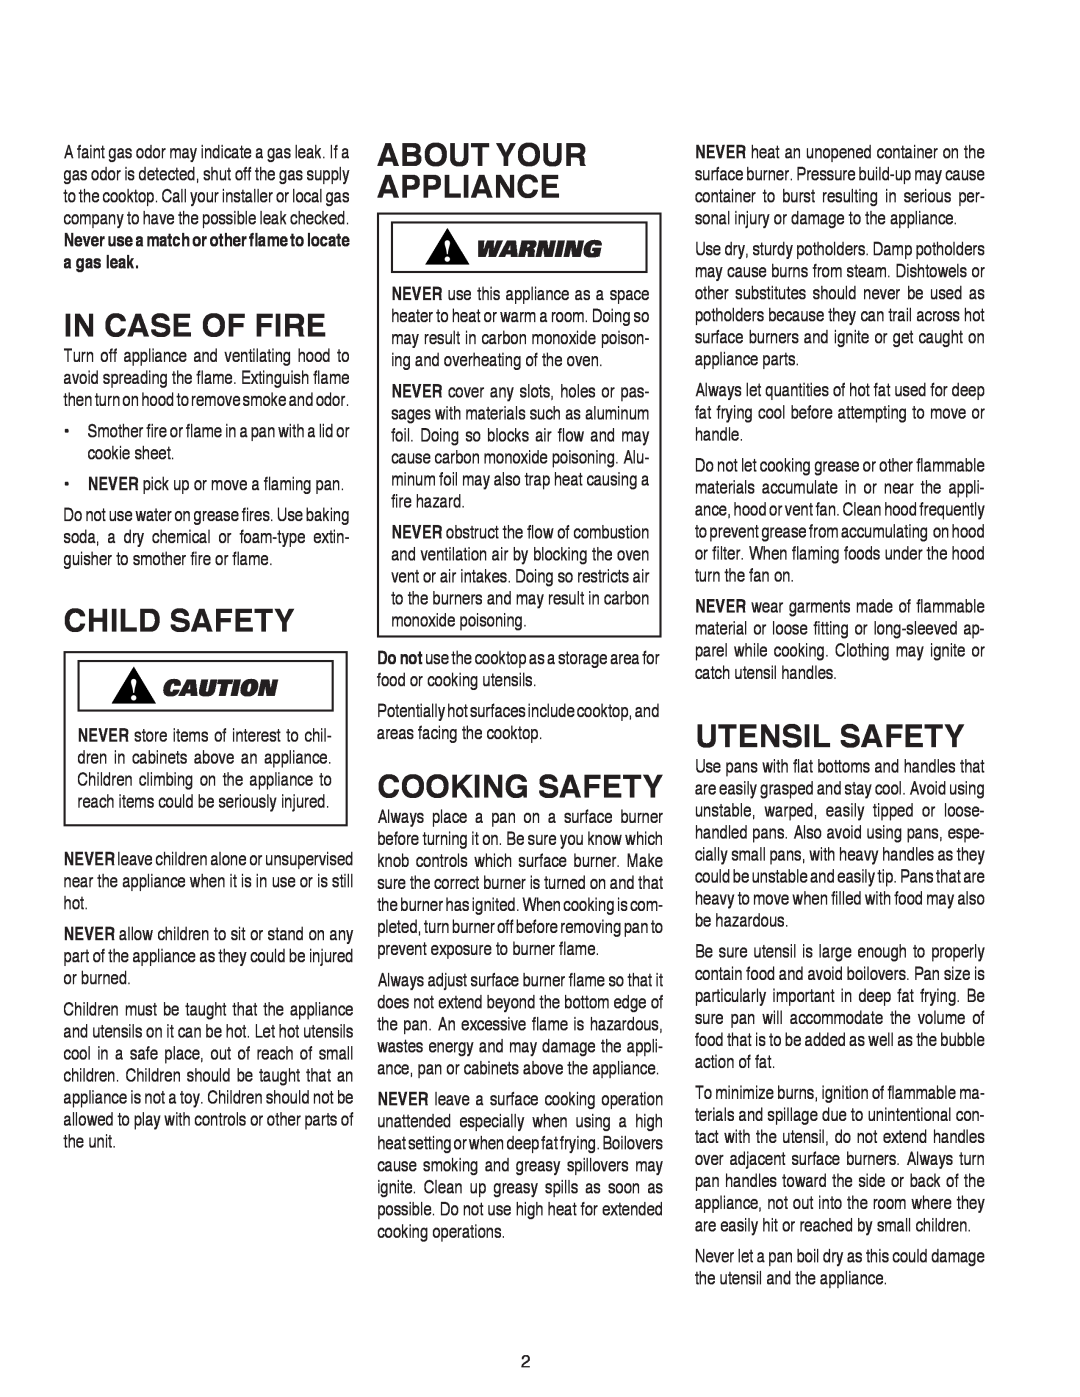 Amana AKS3040, AKS3640 In Case Of Fire, Child Safety, About Your Appliance, Cooking Safety, Utensil Safety 